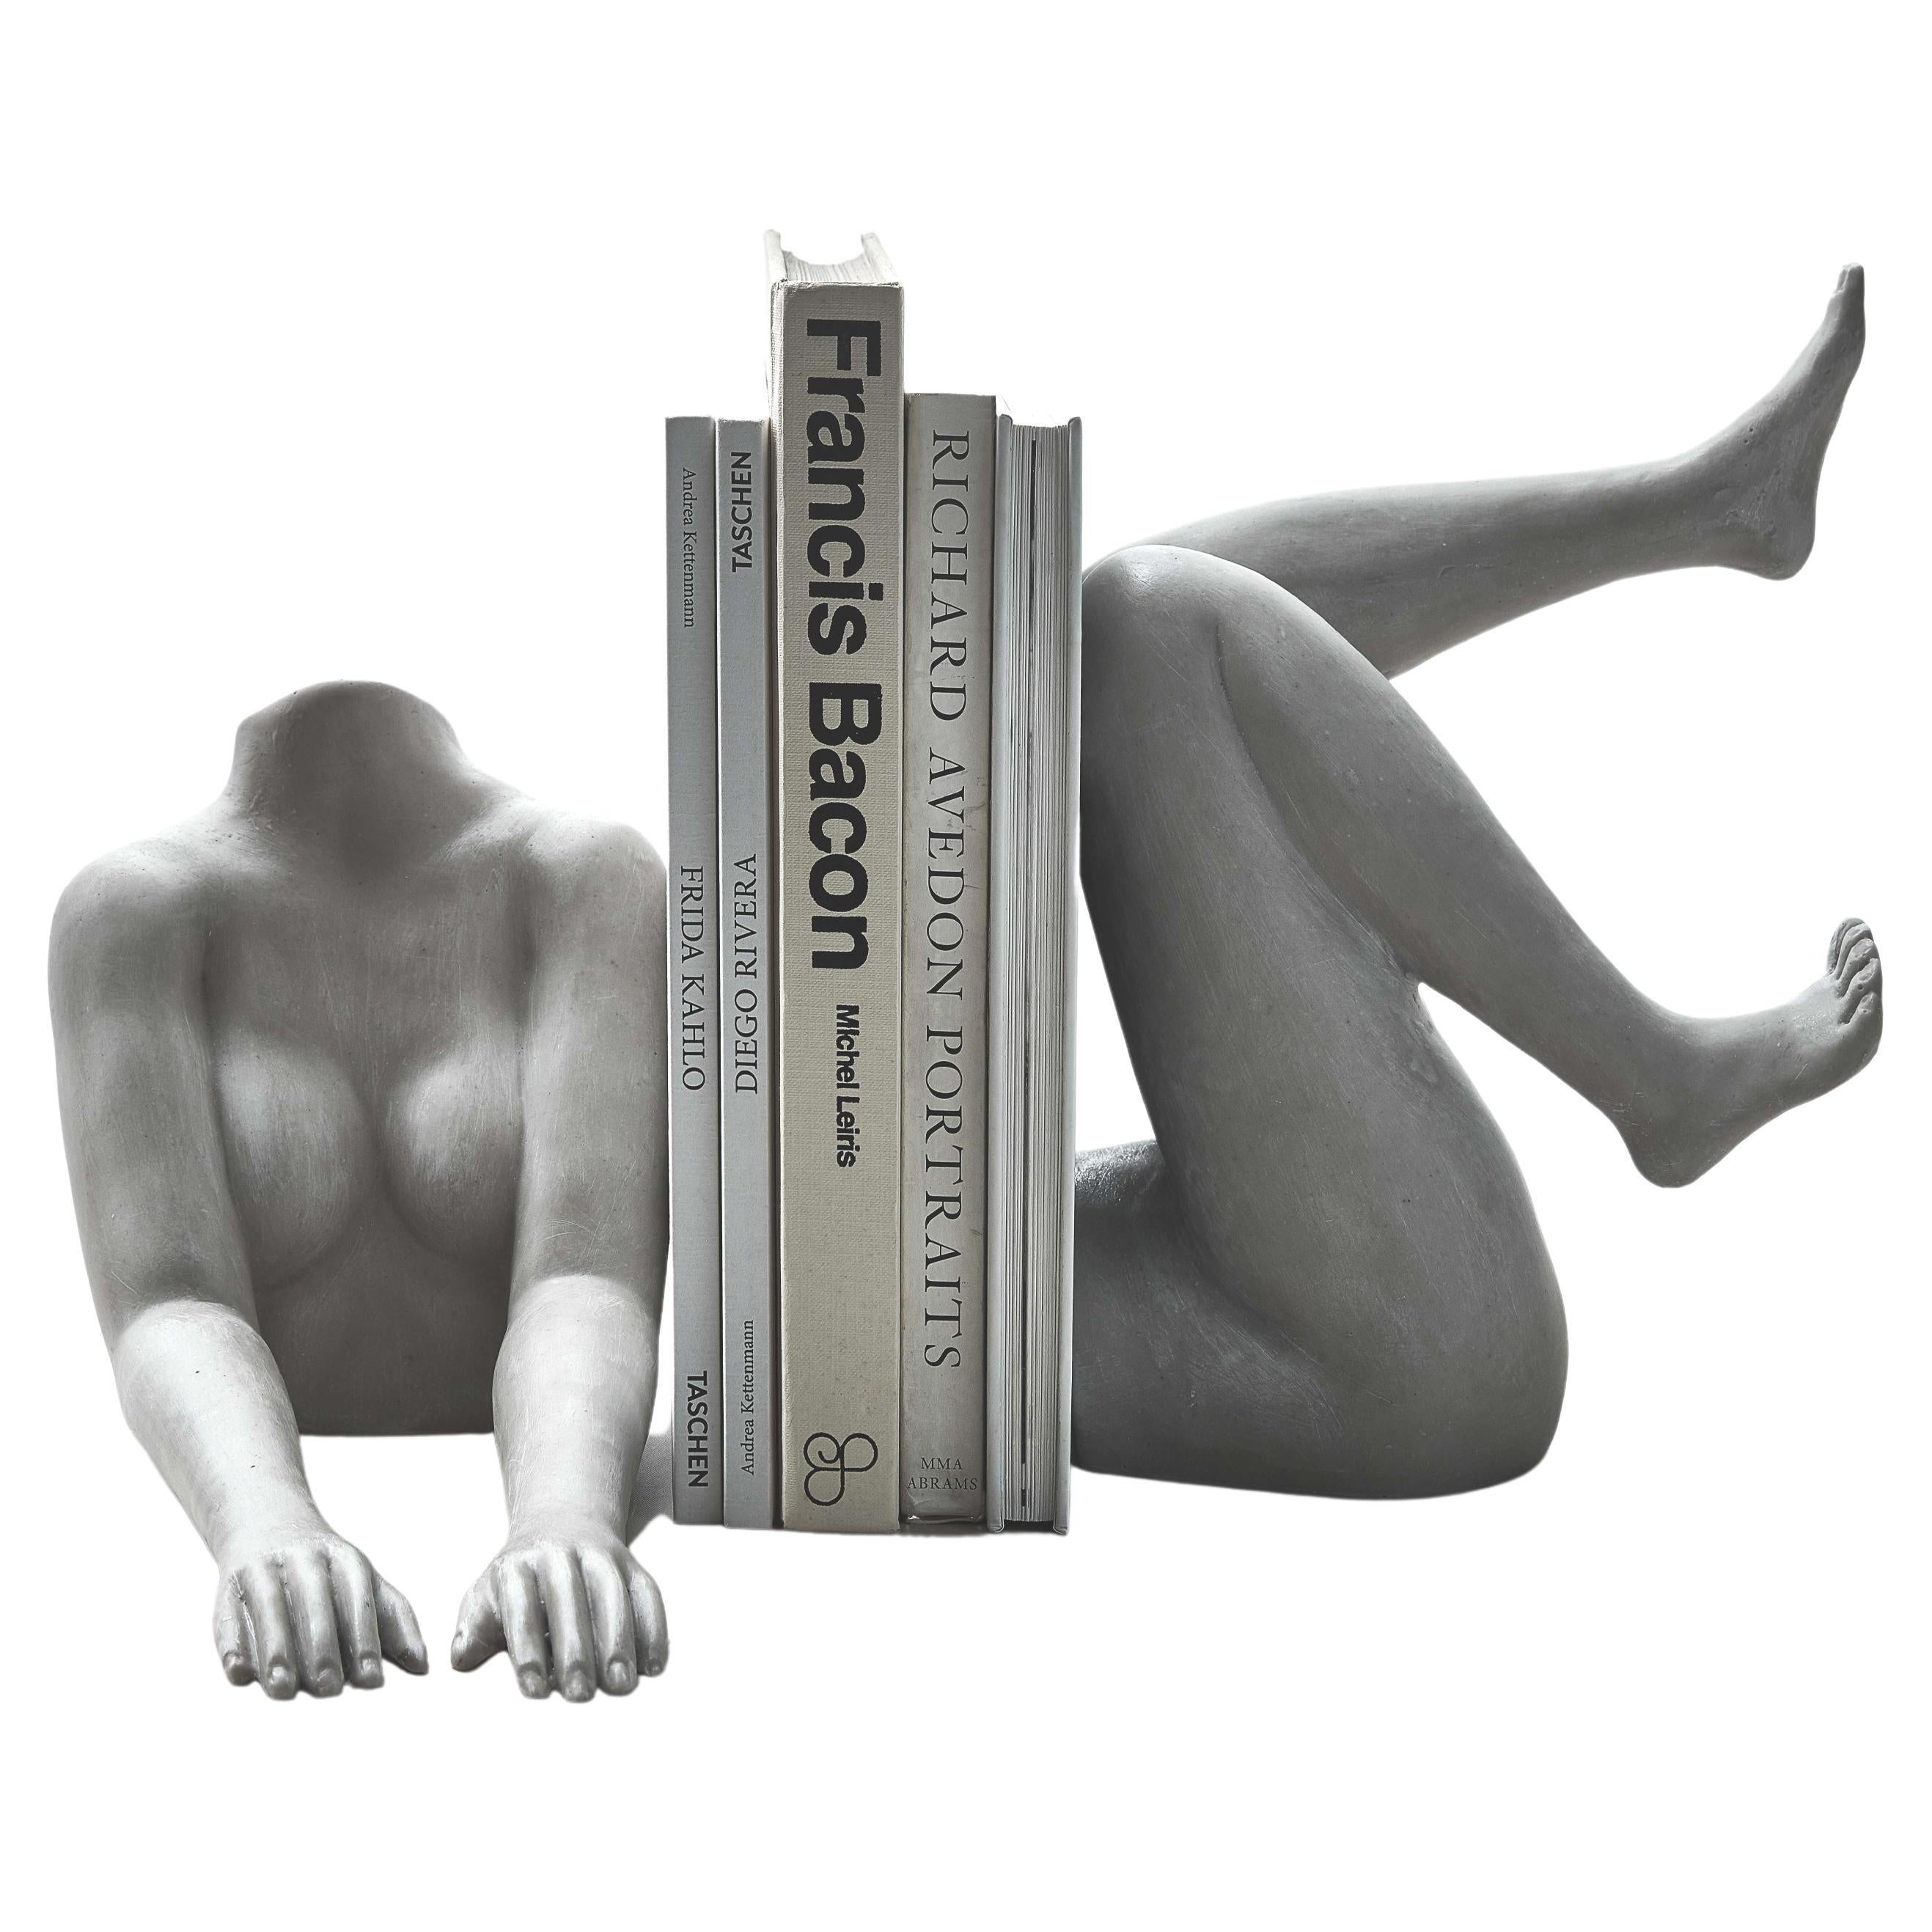 Il Corpo Sculptural Bookends Portraying Female Body Hand Crafted Resin Stone For Sale